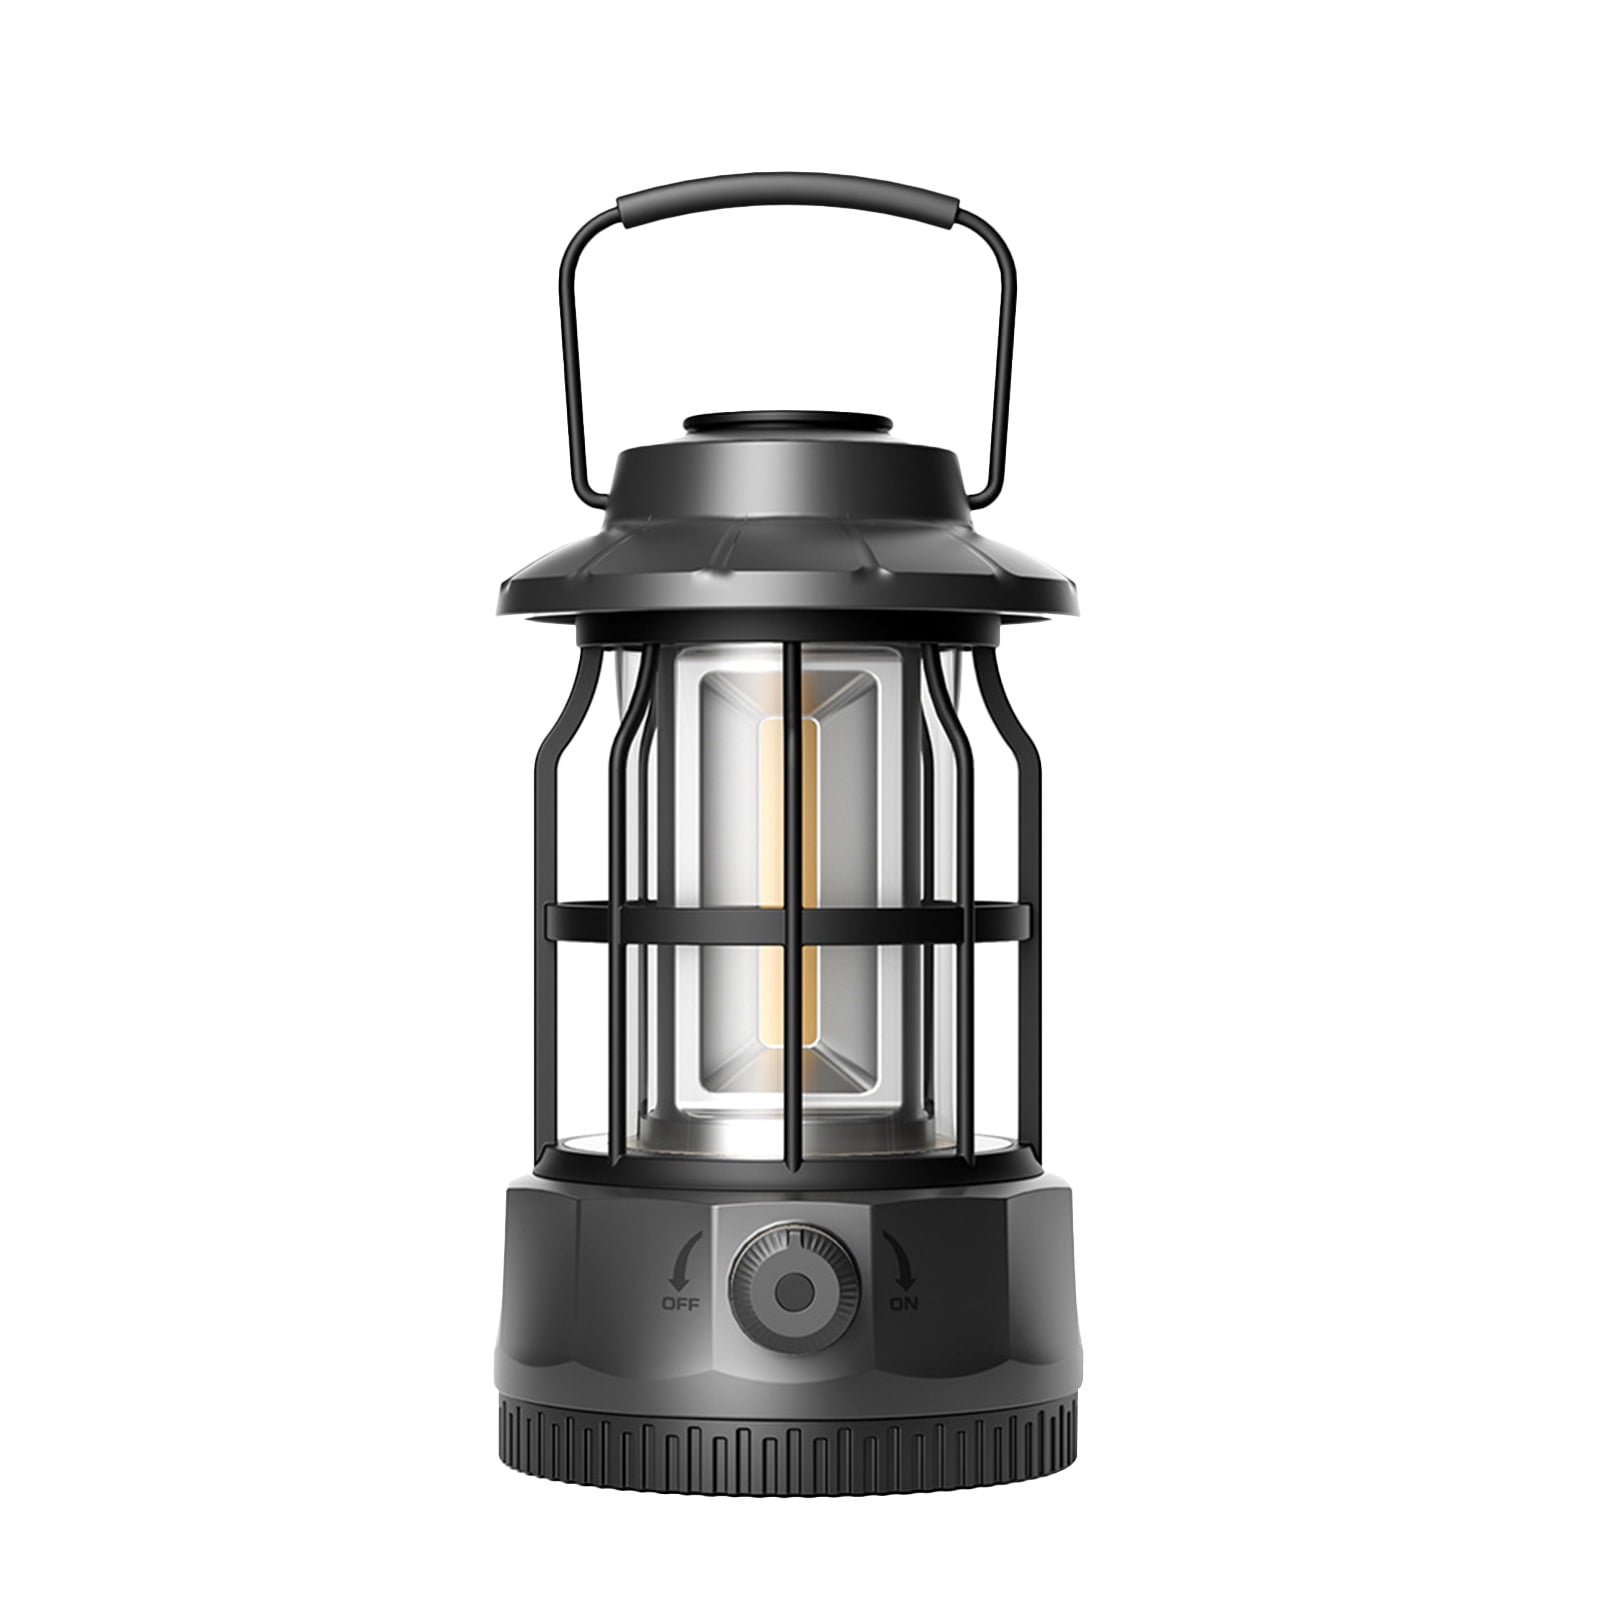 SUNLONG Camping Lantern,Portable Camping Lights,Battery Operated Lanterns  for Power Outages,Romantic Atmosphere Lamp for Party,Tents,Hiking (Black)